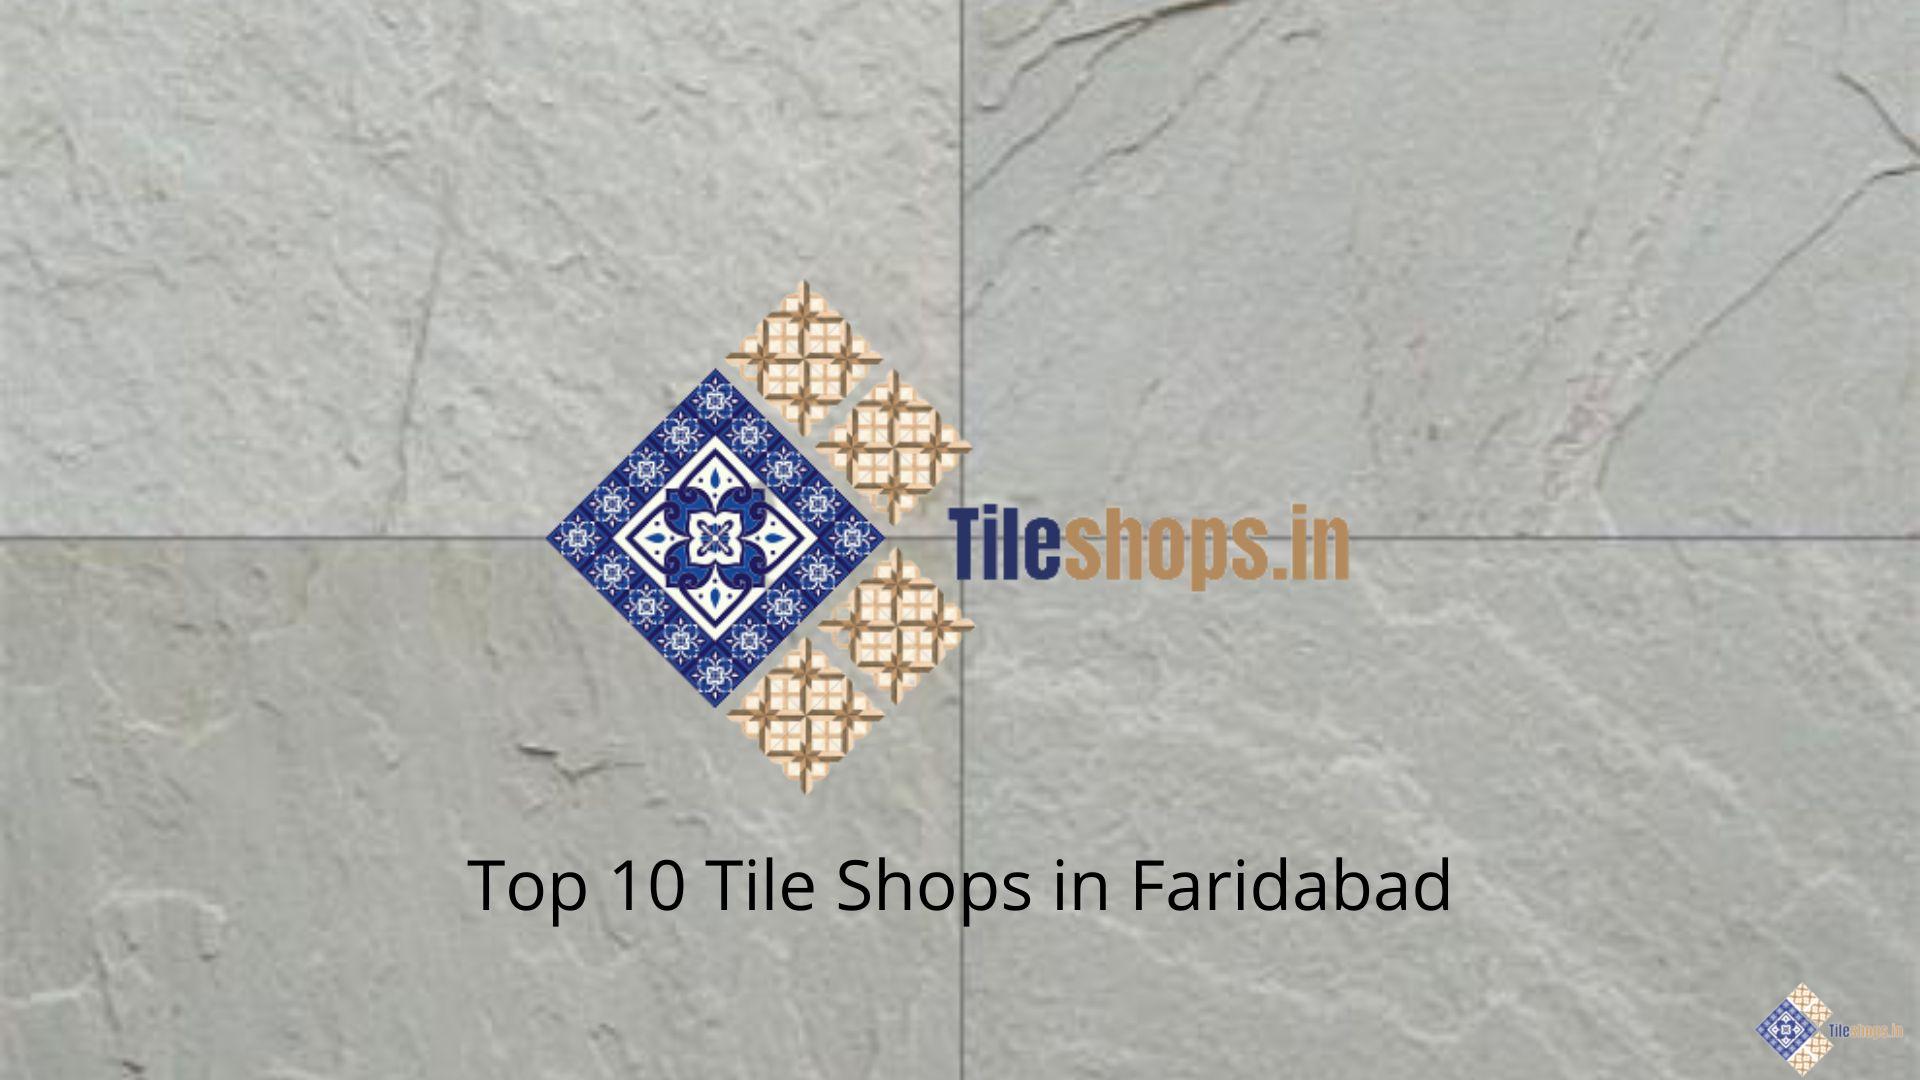 Top 10 Tile Shops in Faridabad